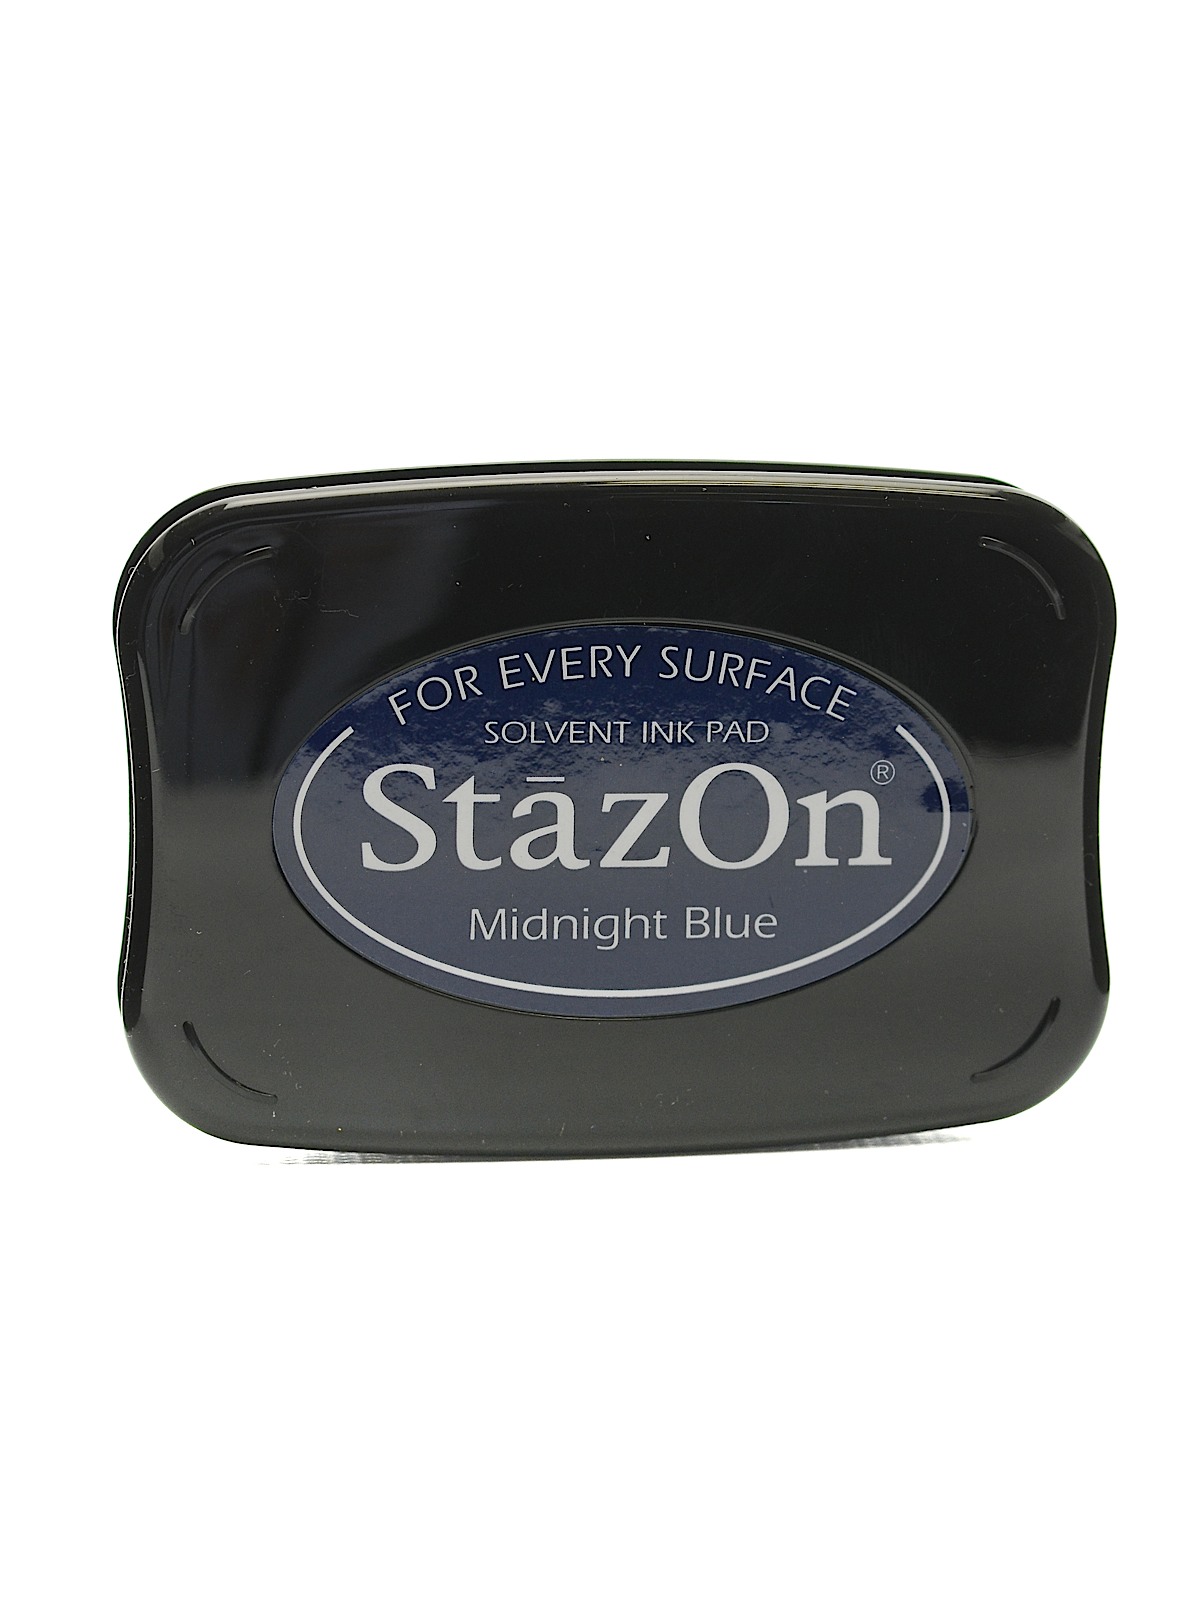 Stazon Solvent Ink Midnight Blue 3.75 In. X 2.625 In. Full-size Pad